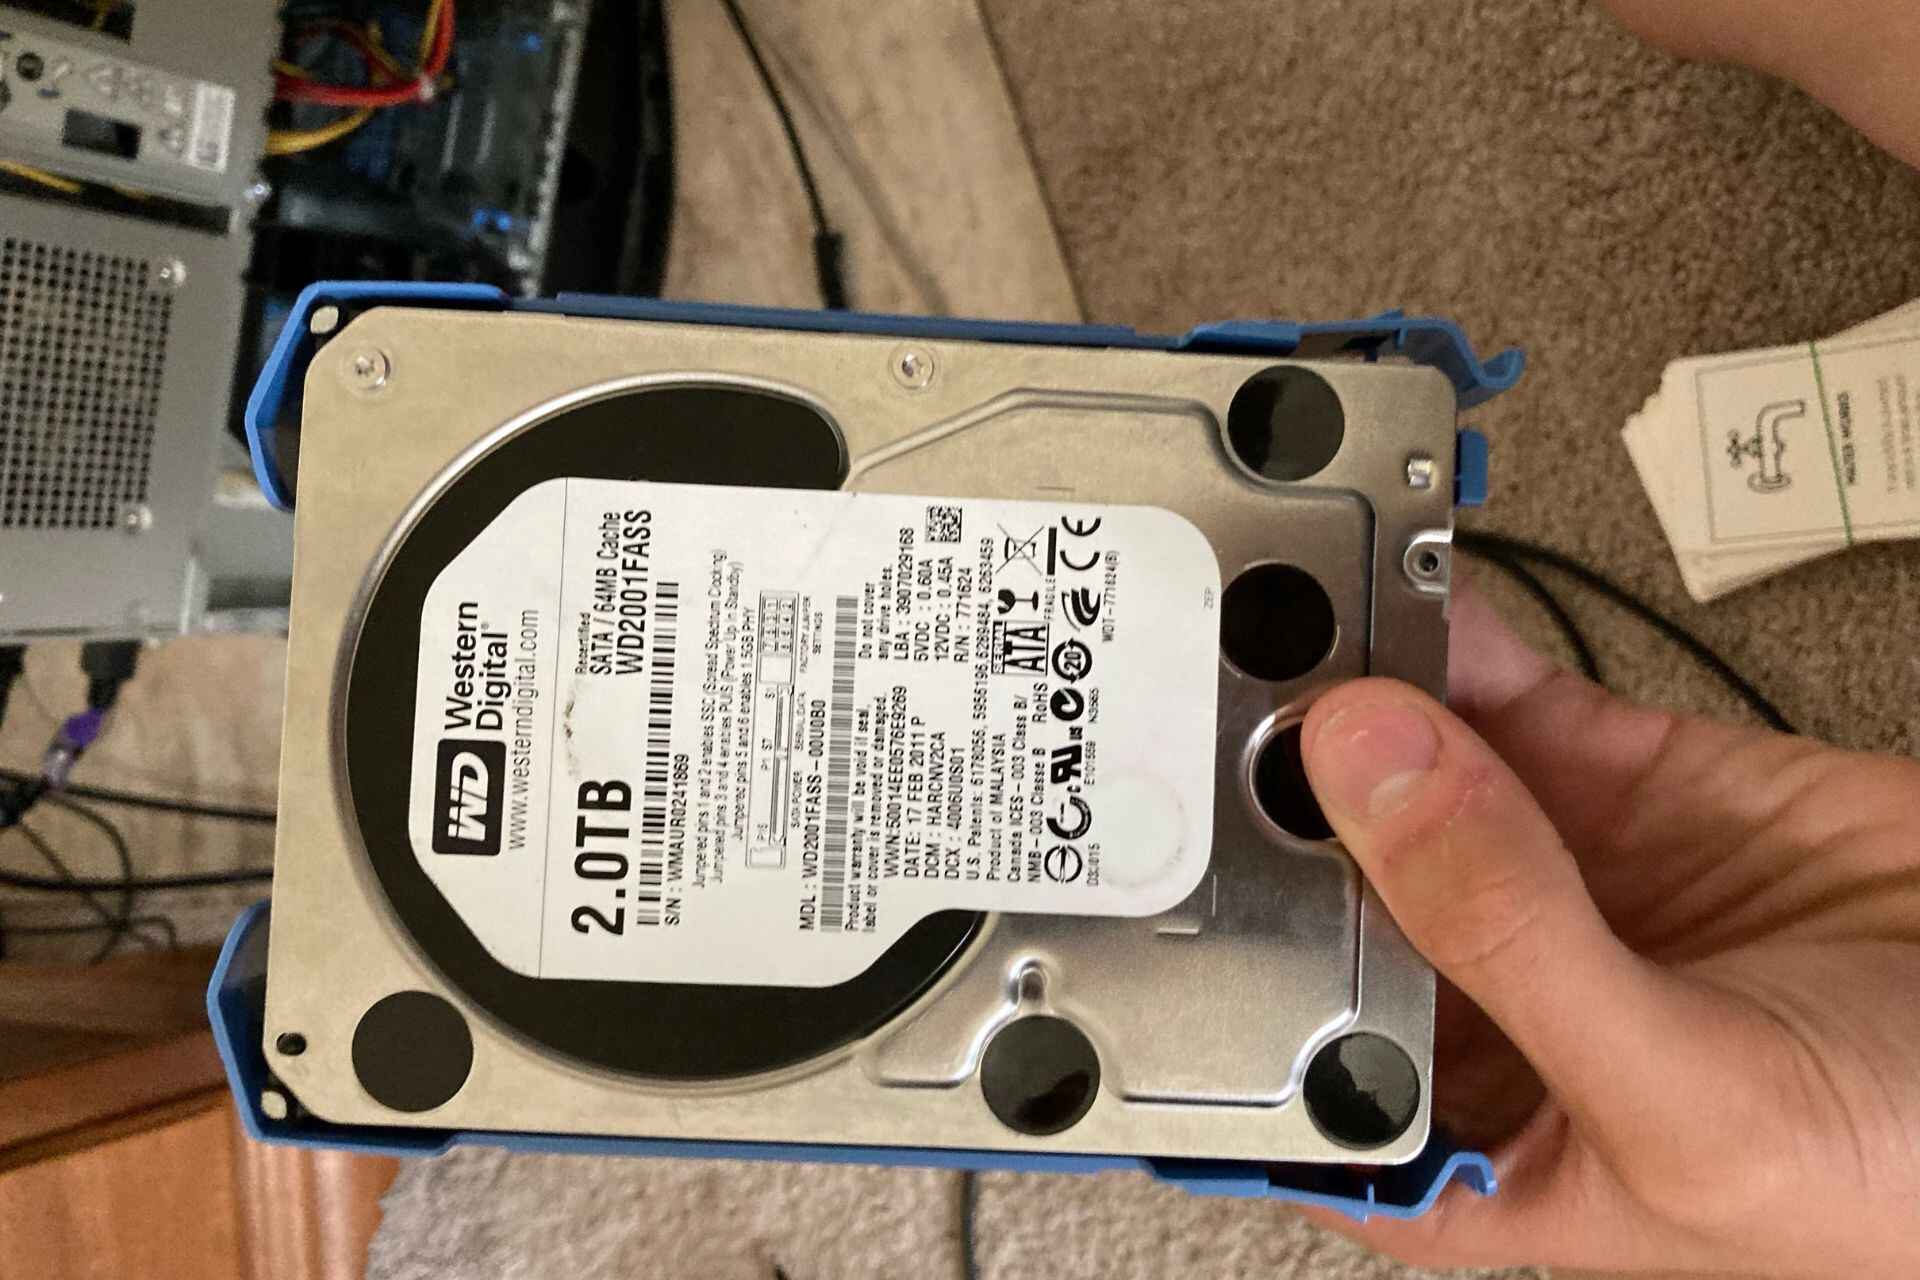 What Is The Puis Jumper Do On Hard Disk Drive